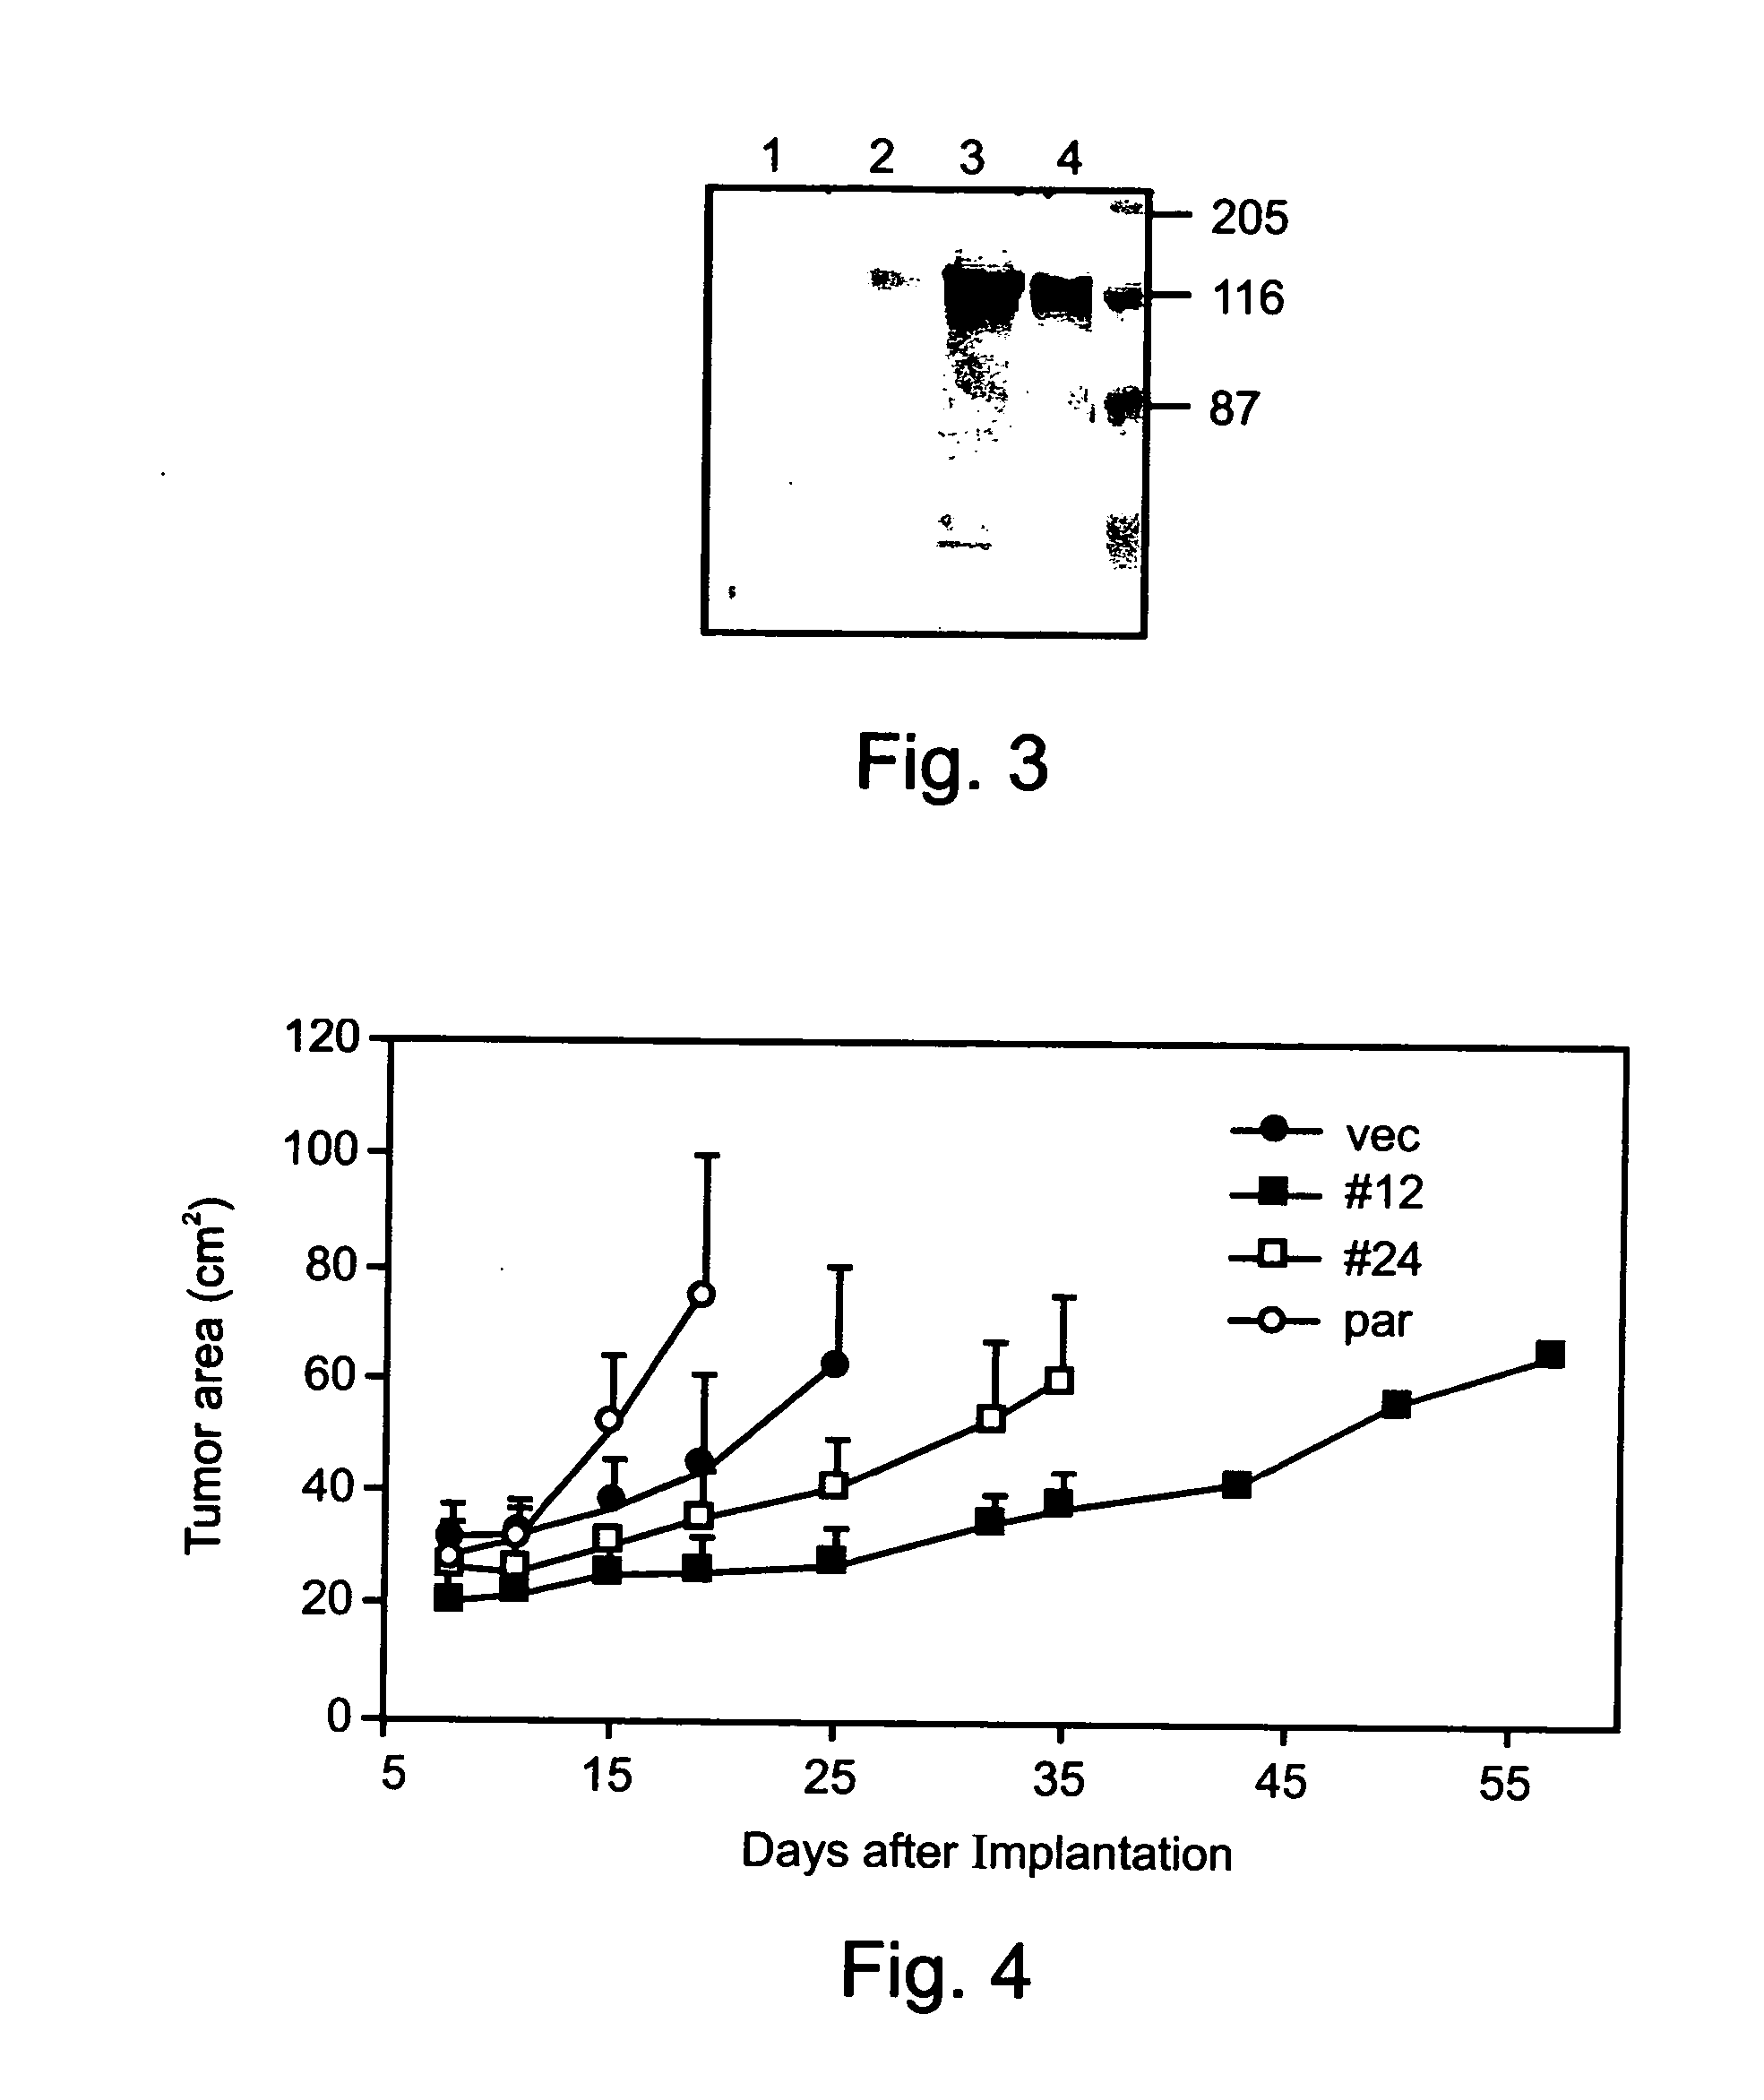 Pharmaceutical compositions and methods useful for modulating angiogenesis, inhibiting metastasis and tumor fibrosis, and assessing the malignancy of colon cancer tumors